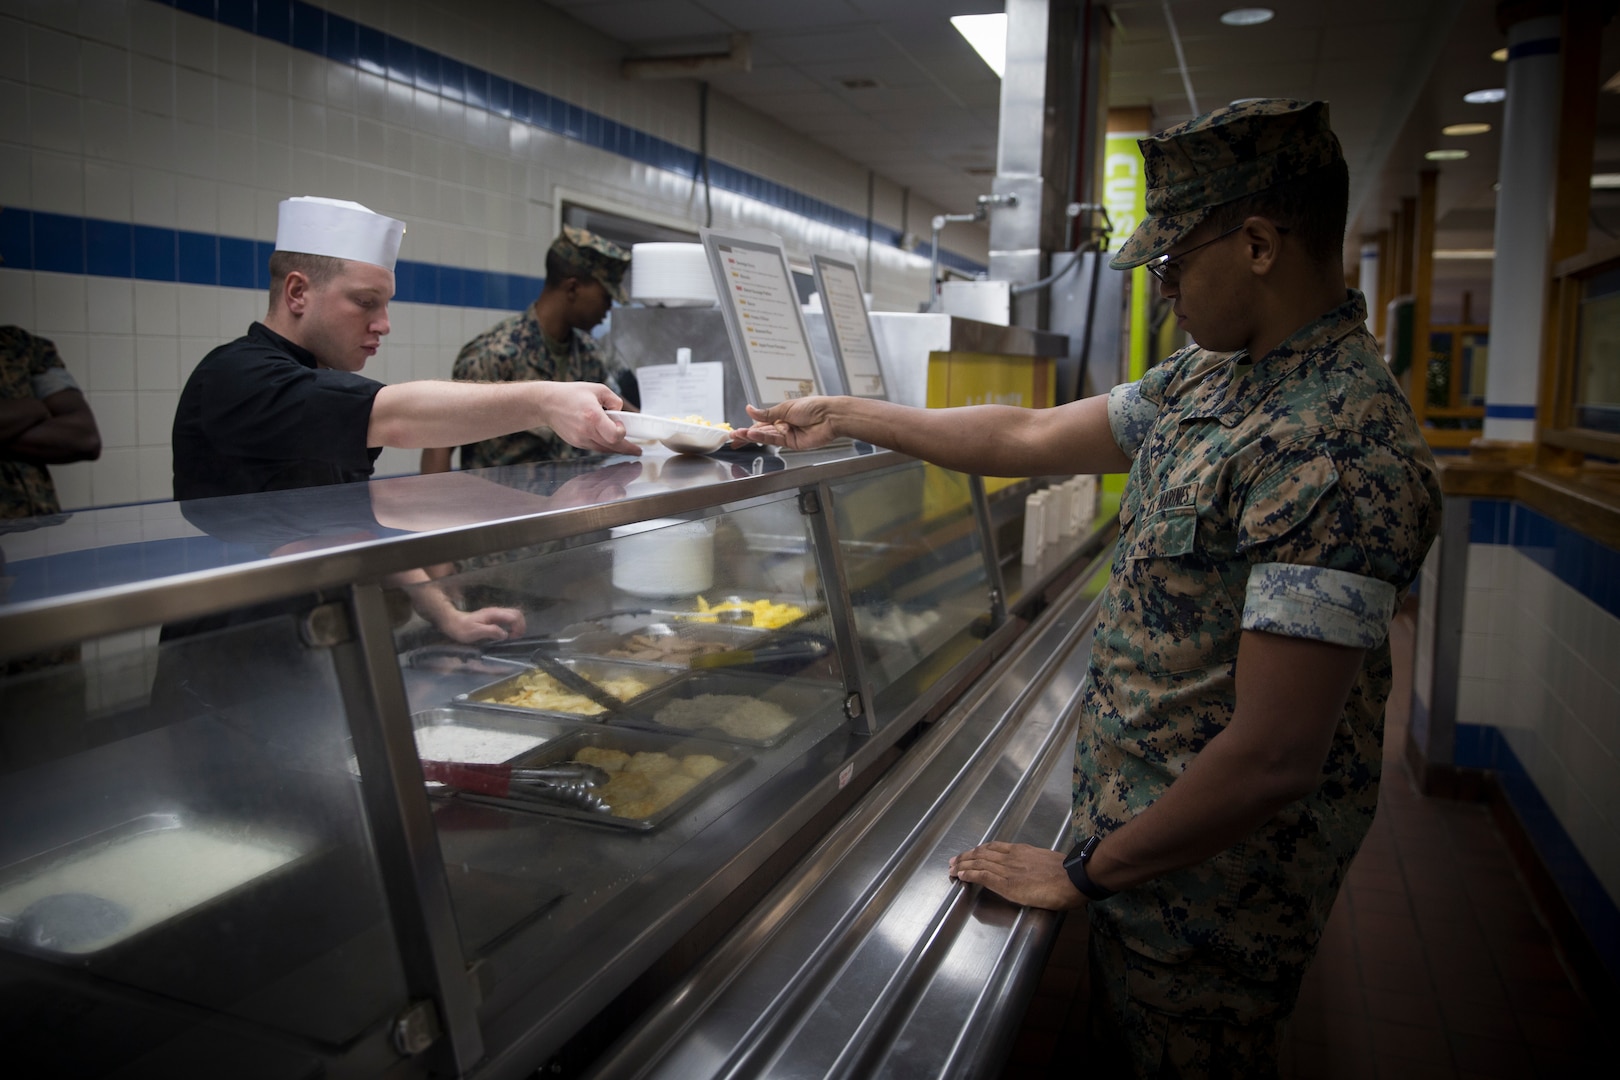 U.S. Marine Corps Cpl. Christopher Modro with 10th Marine Regiment, 2nd Marine Division, serves breakfast to Lance Cpl. Giovani DeleonAcosta, a food service specialist with Headquarters Battalion, 2nd Marine Division, at Camp Lejeune, N.C., Sept. 18, 2018